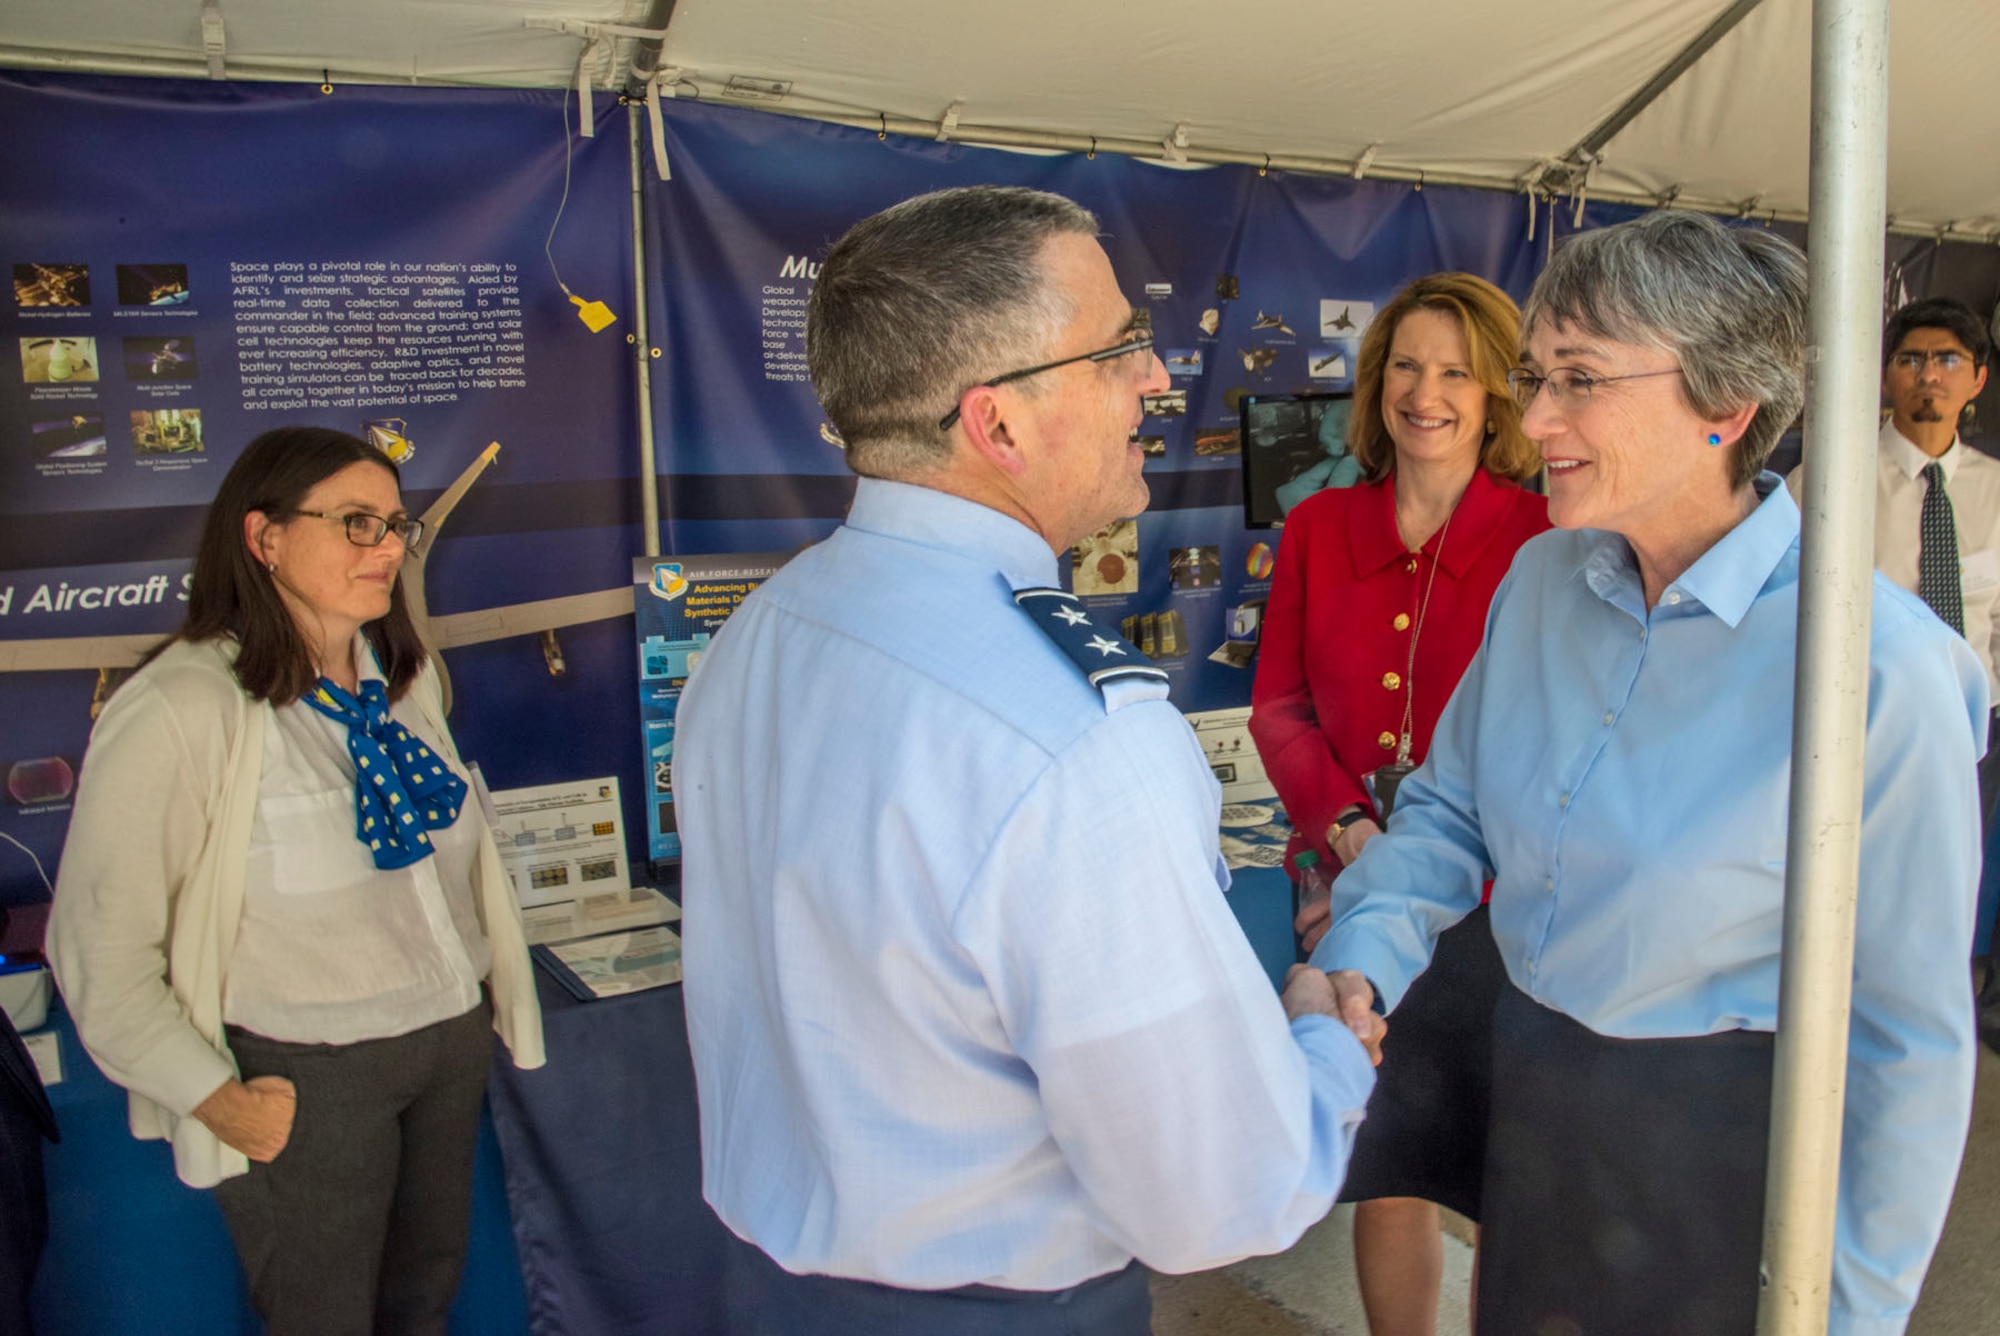 Maj. Gen. William T. Cooley, commander of the Air Force
Research Laboratory, welcomes  Secretary of the Air Force Heather A. Wilson to the Air Force exhibit area during the
2nd biennial DoD Lab Day at the Pentagon center courtyard May 18, 2017. (U.S. Air Force photo/Mikee Huber)
